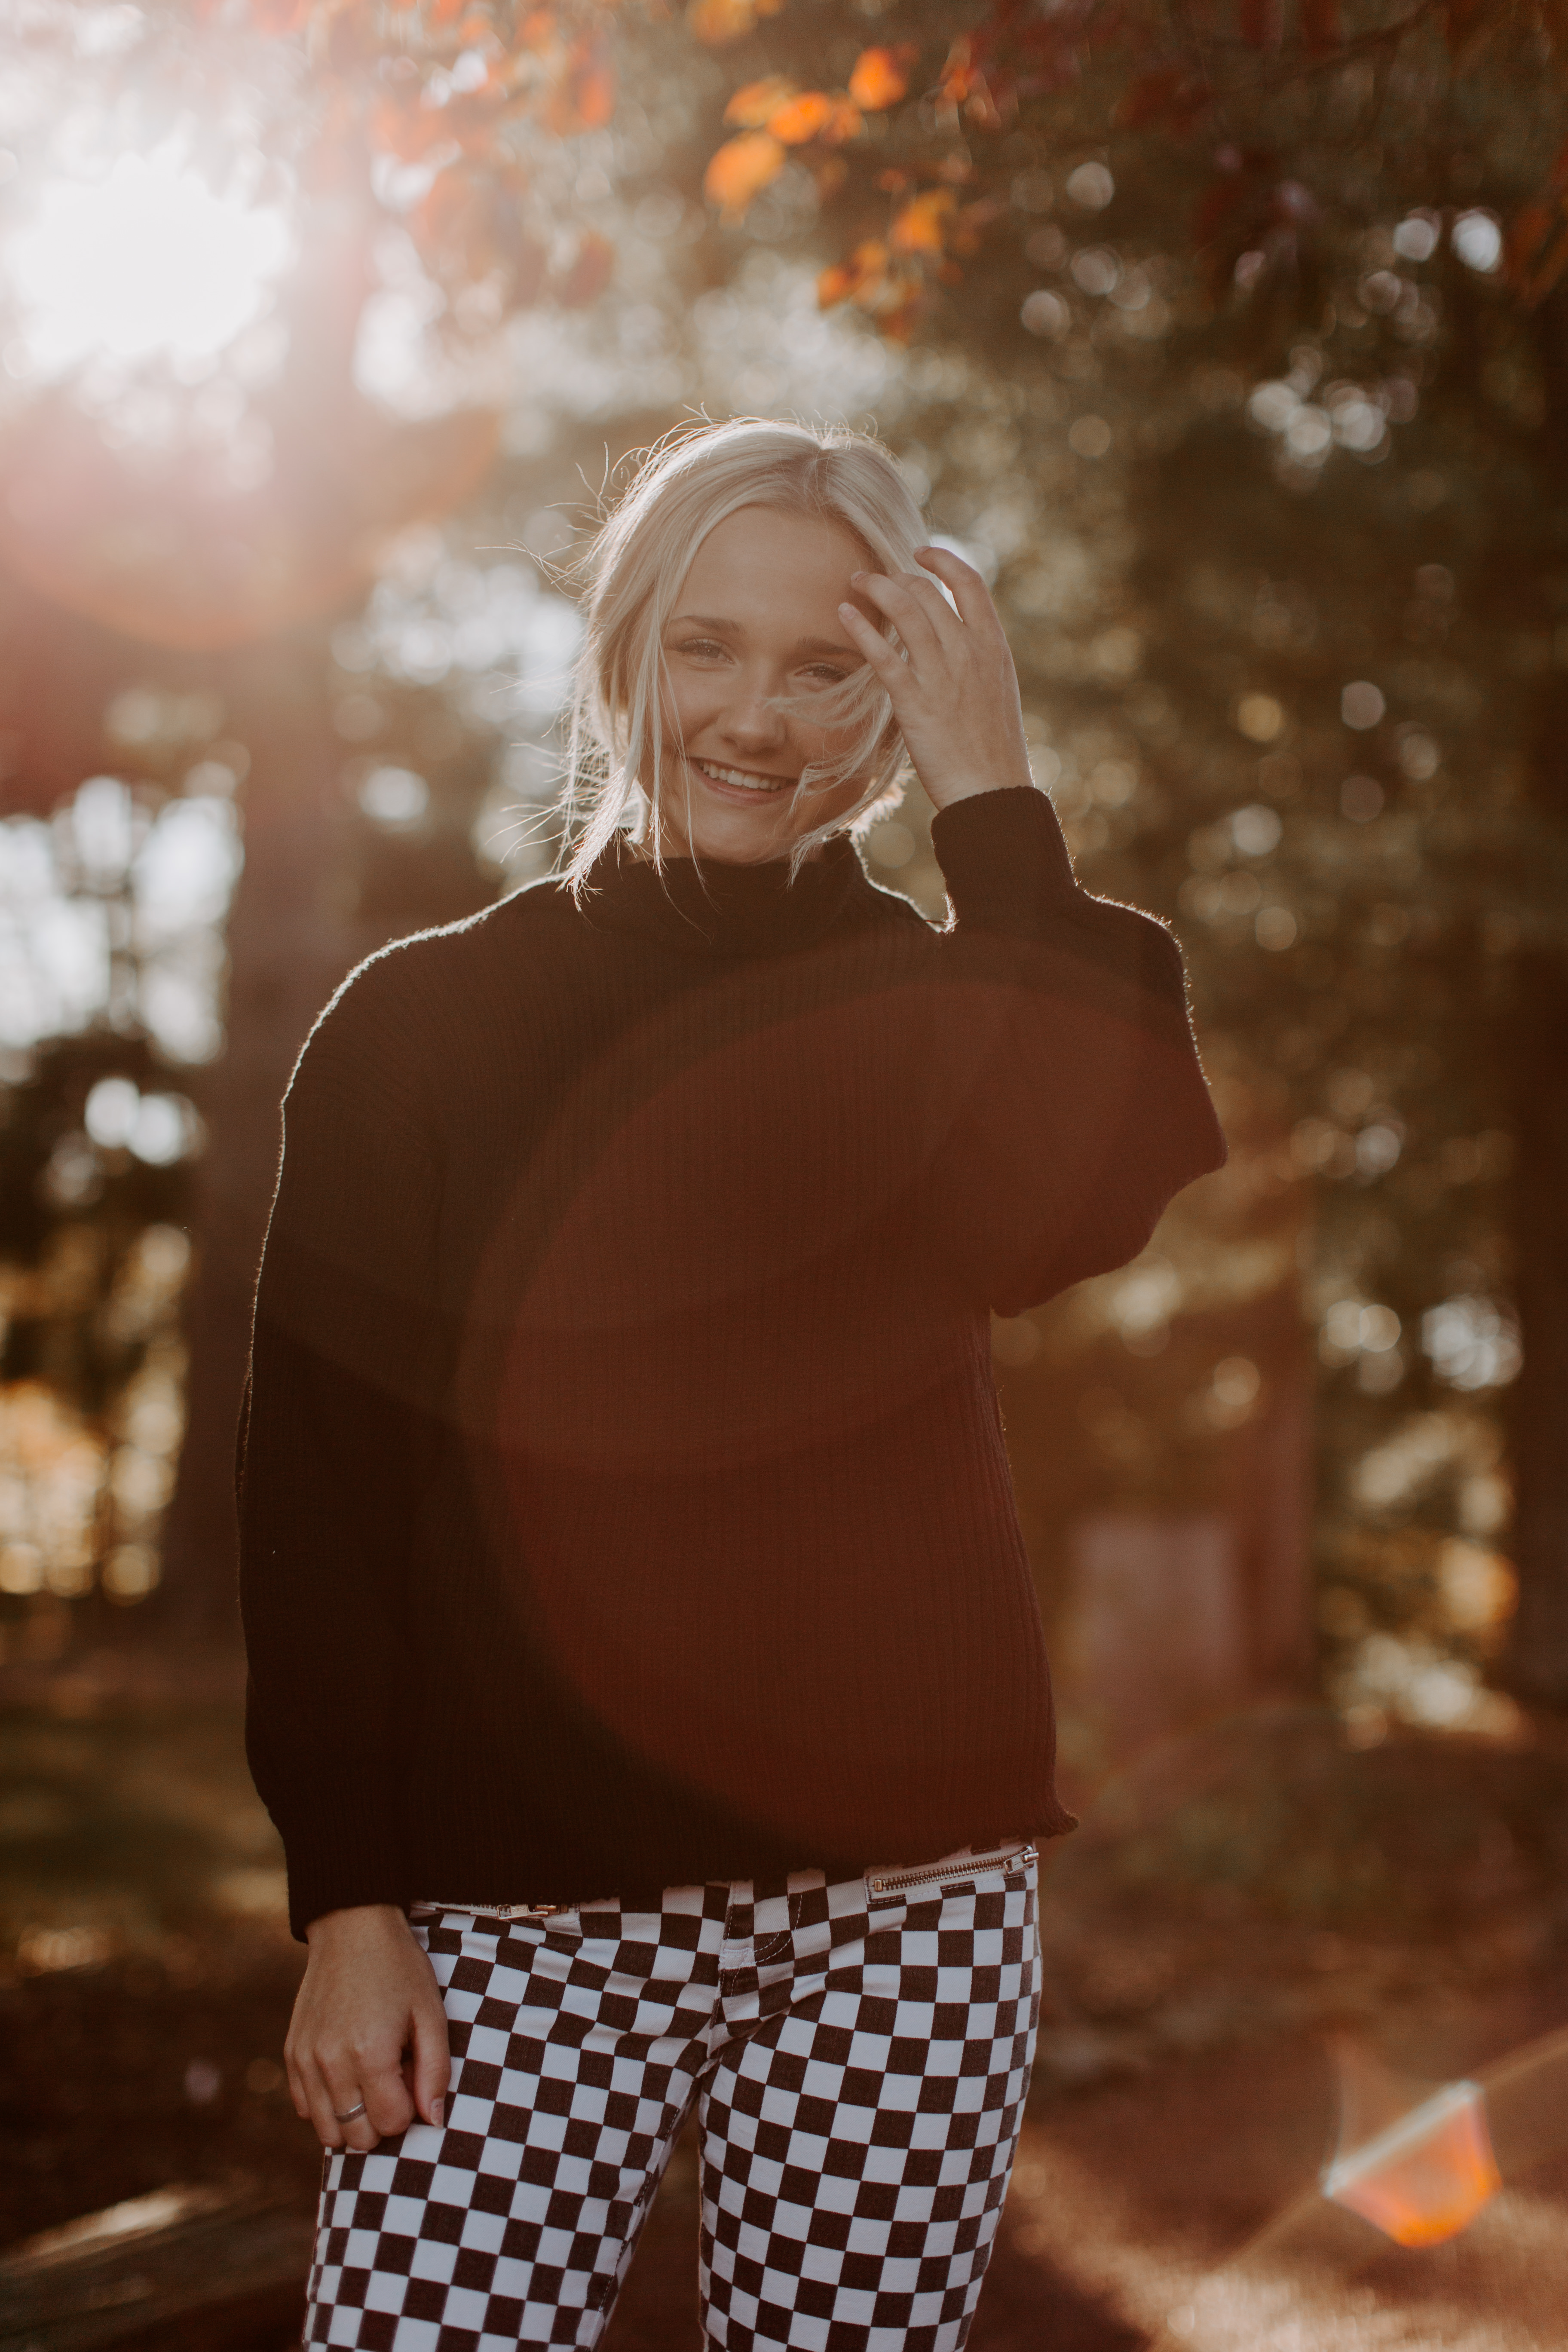 Ashley W. free people senior pictures black sweater checkered pants lifestyle city candid model pose wedding elopement blonde hair outfit overall white preset